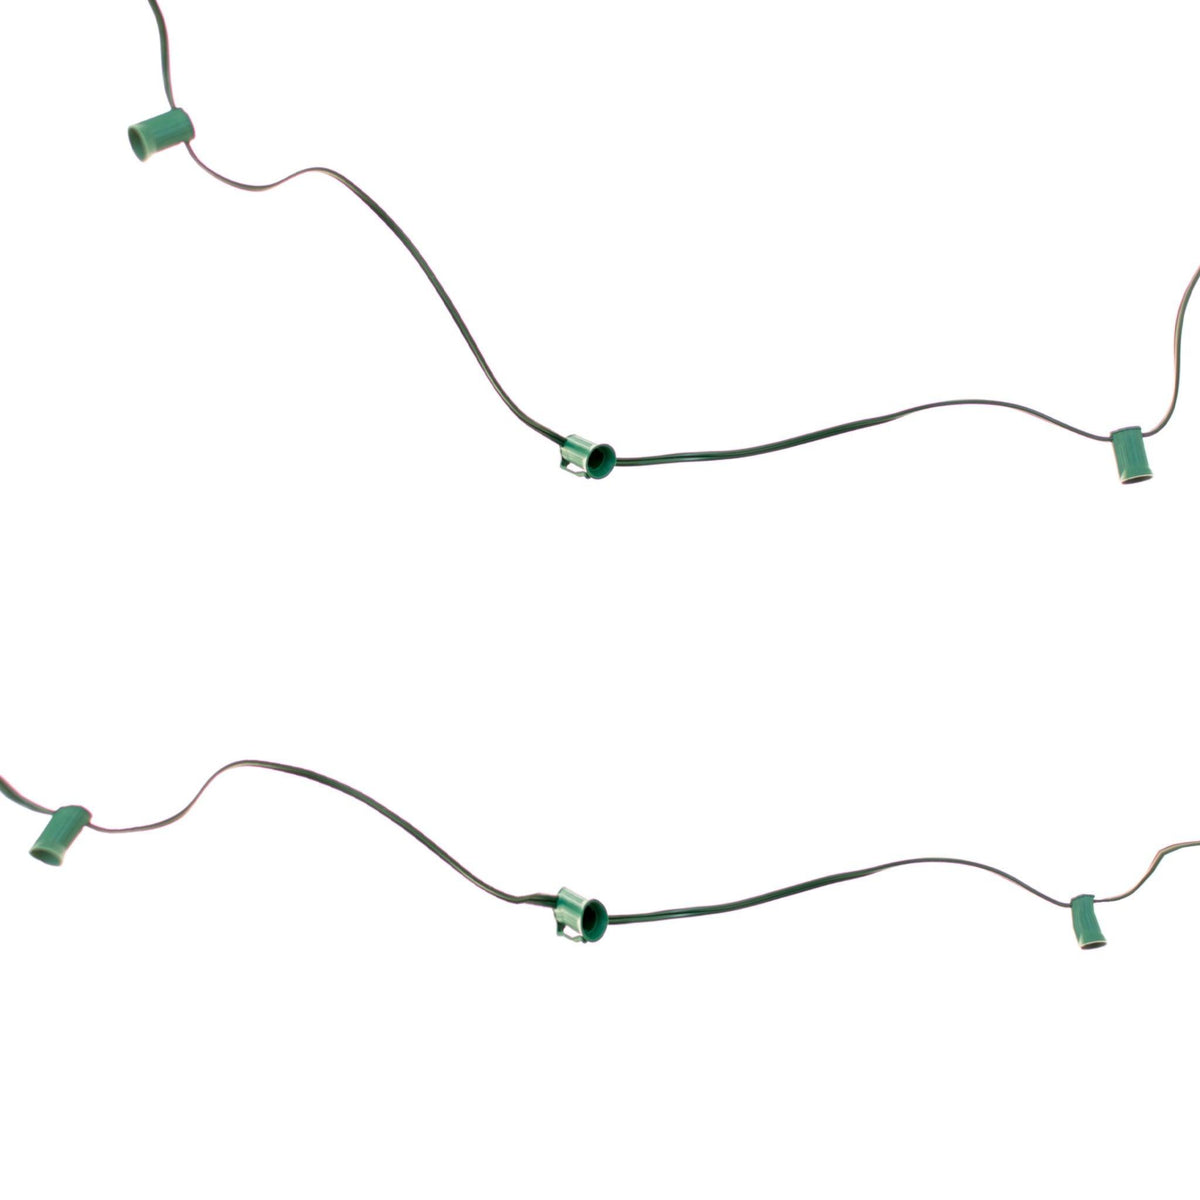 Lee Display's G50 Globe Lighting Patio String Sets with 25ft cords included